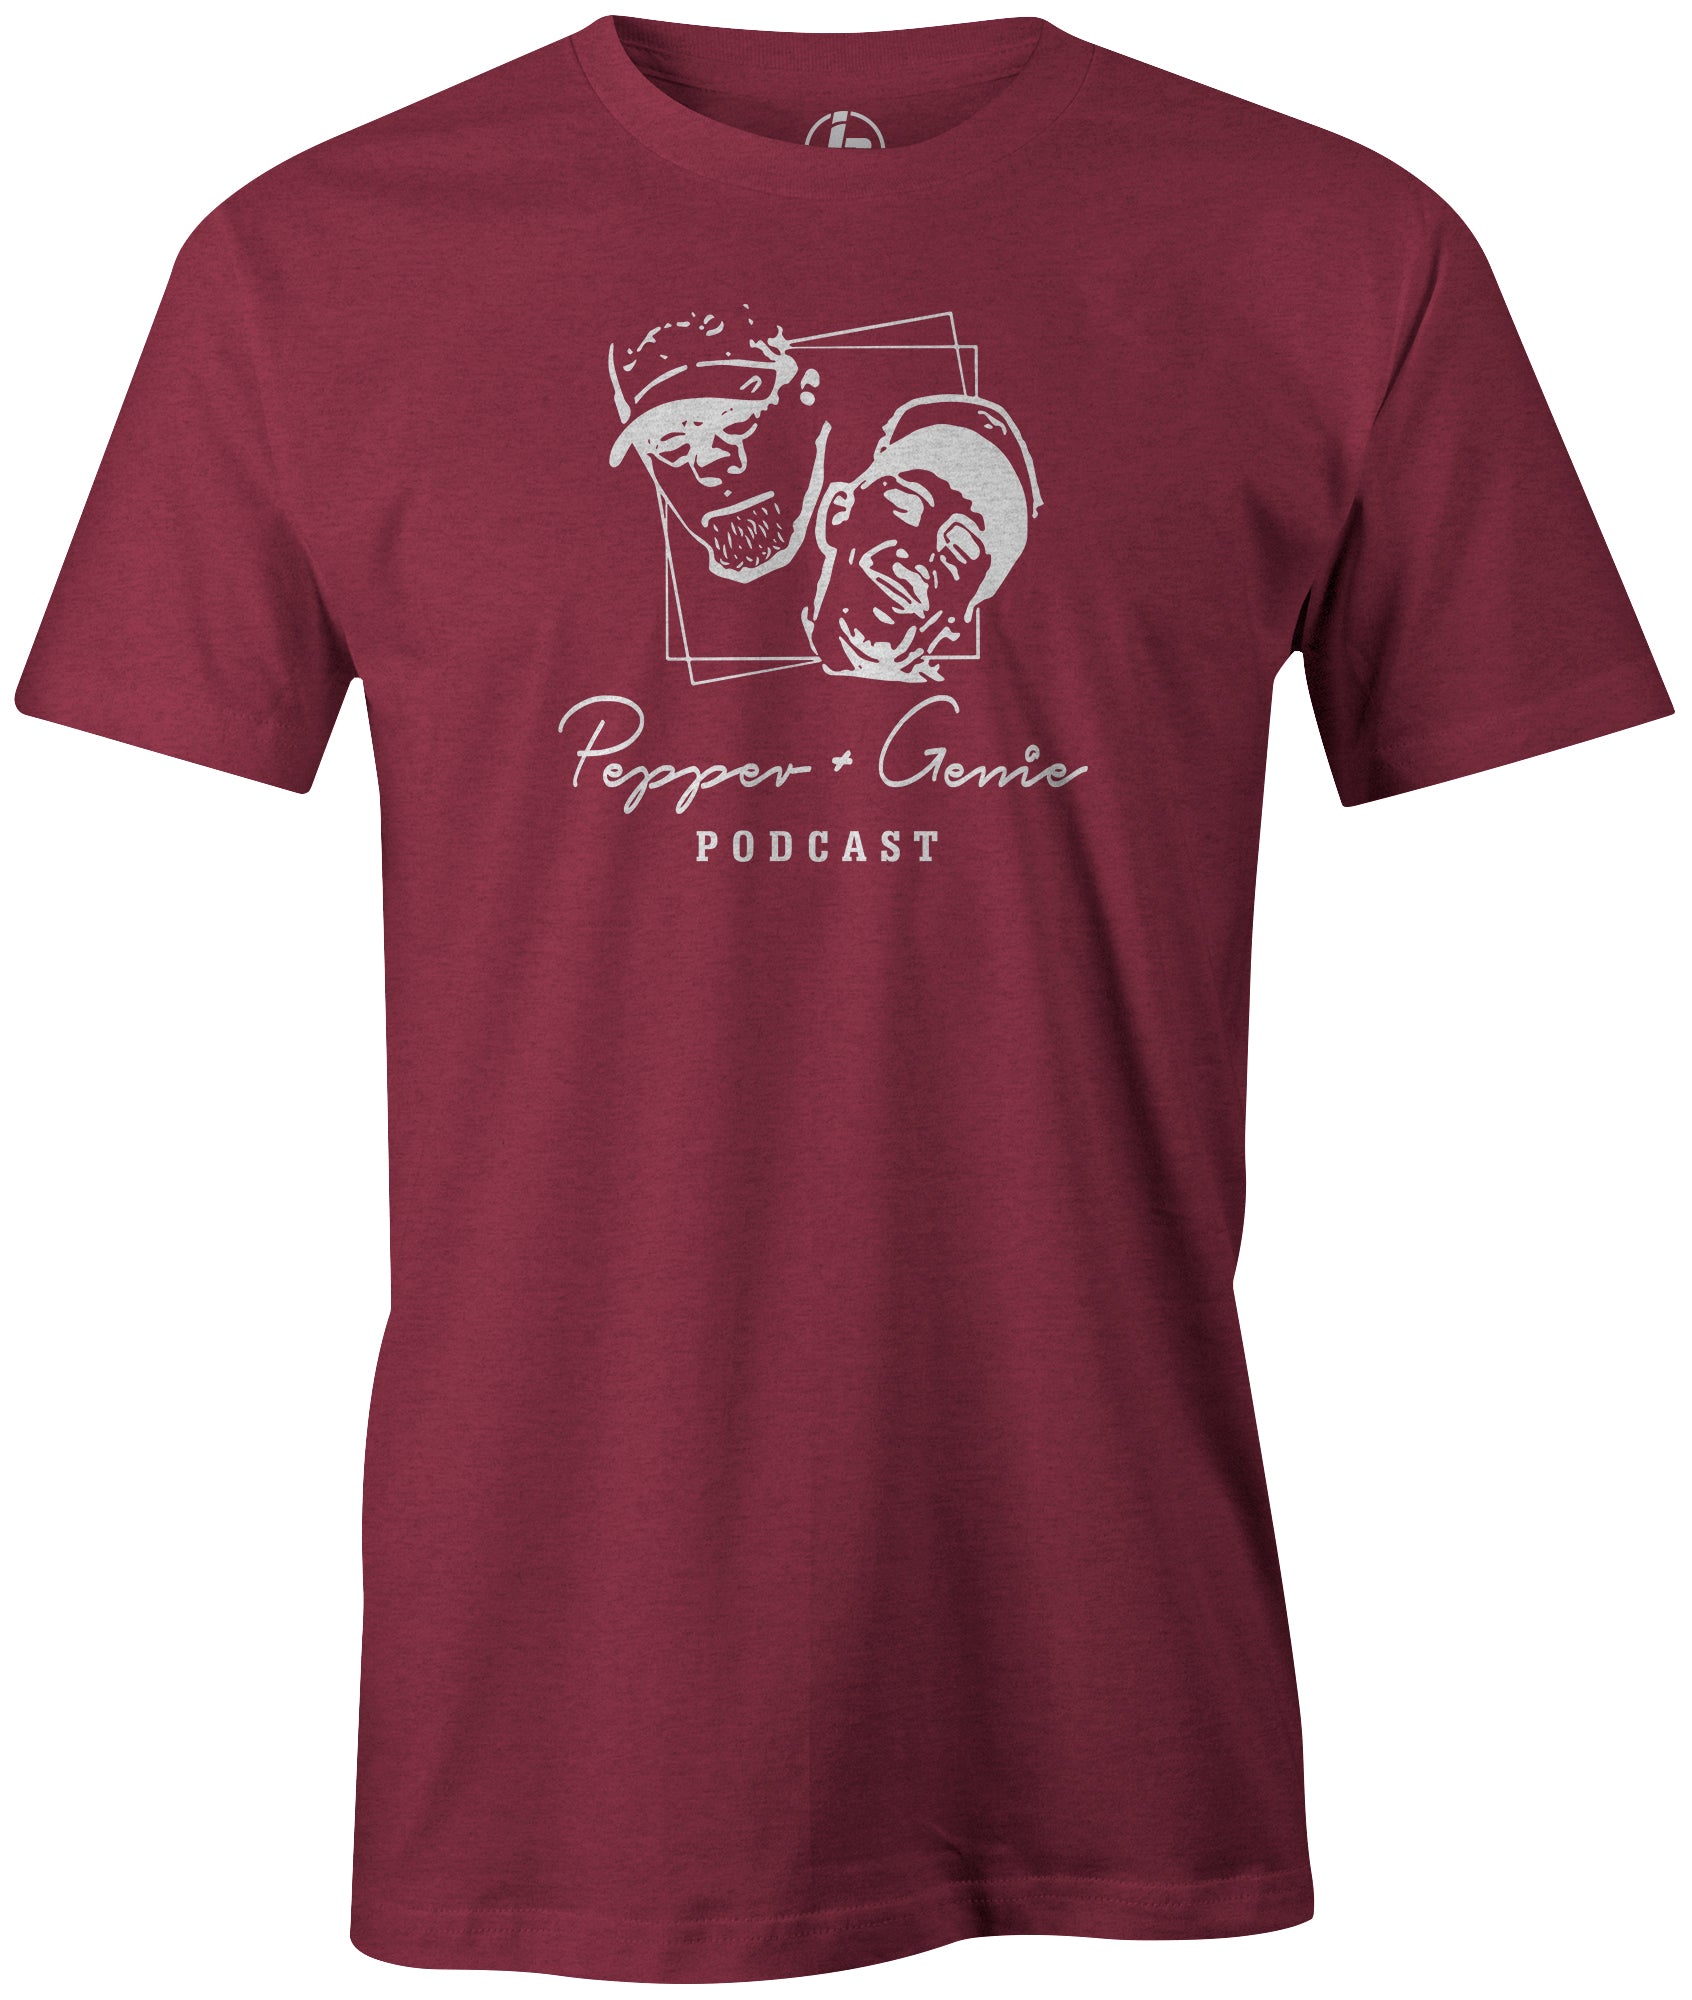 Show your support for the Pepper n Geanie Podcast with this stylish tee! 3 letters, 3 hours of fun. Represent your favorite morning show in this classic TMA t-shirt. Available in several colors to wet your whistle. tim doug iggy jackson plowsy